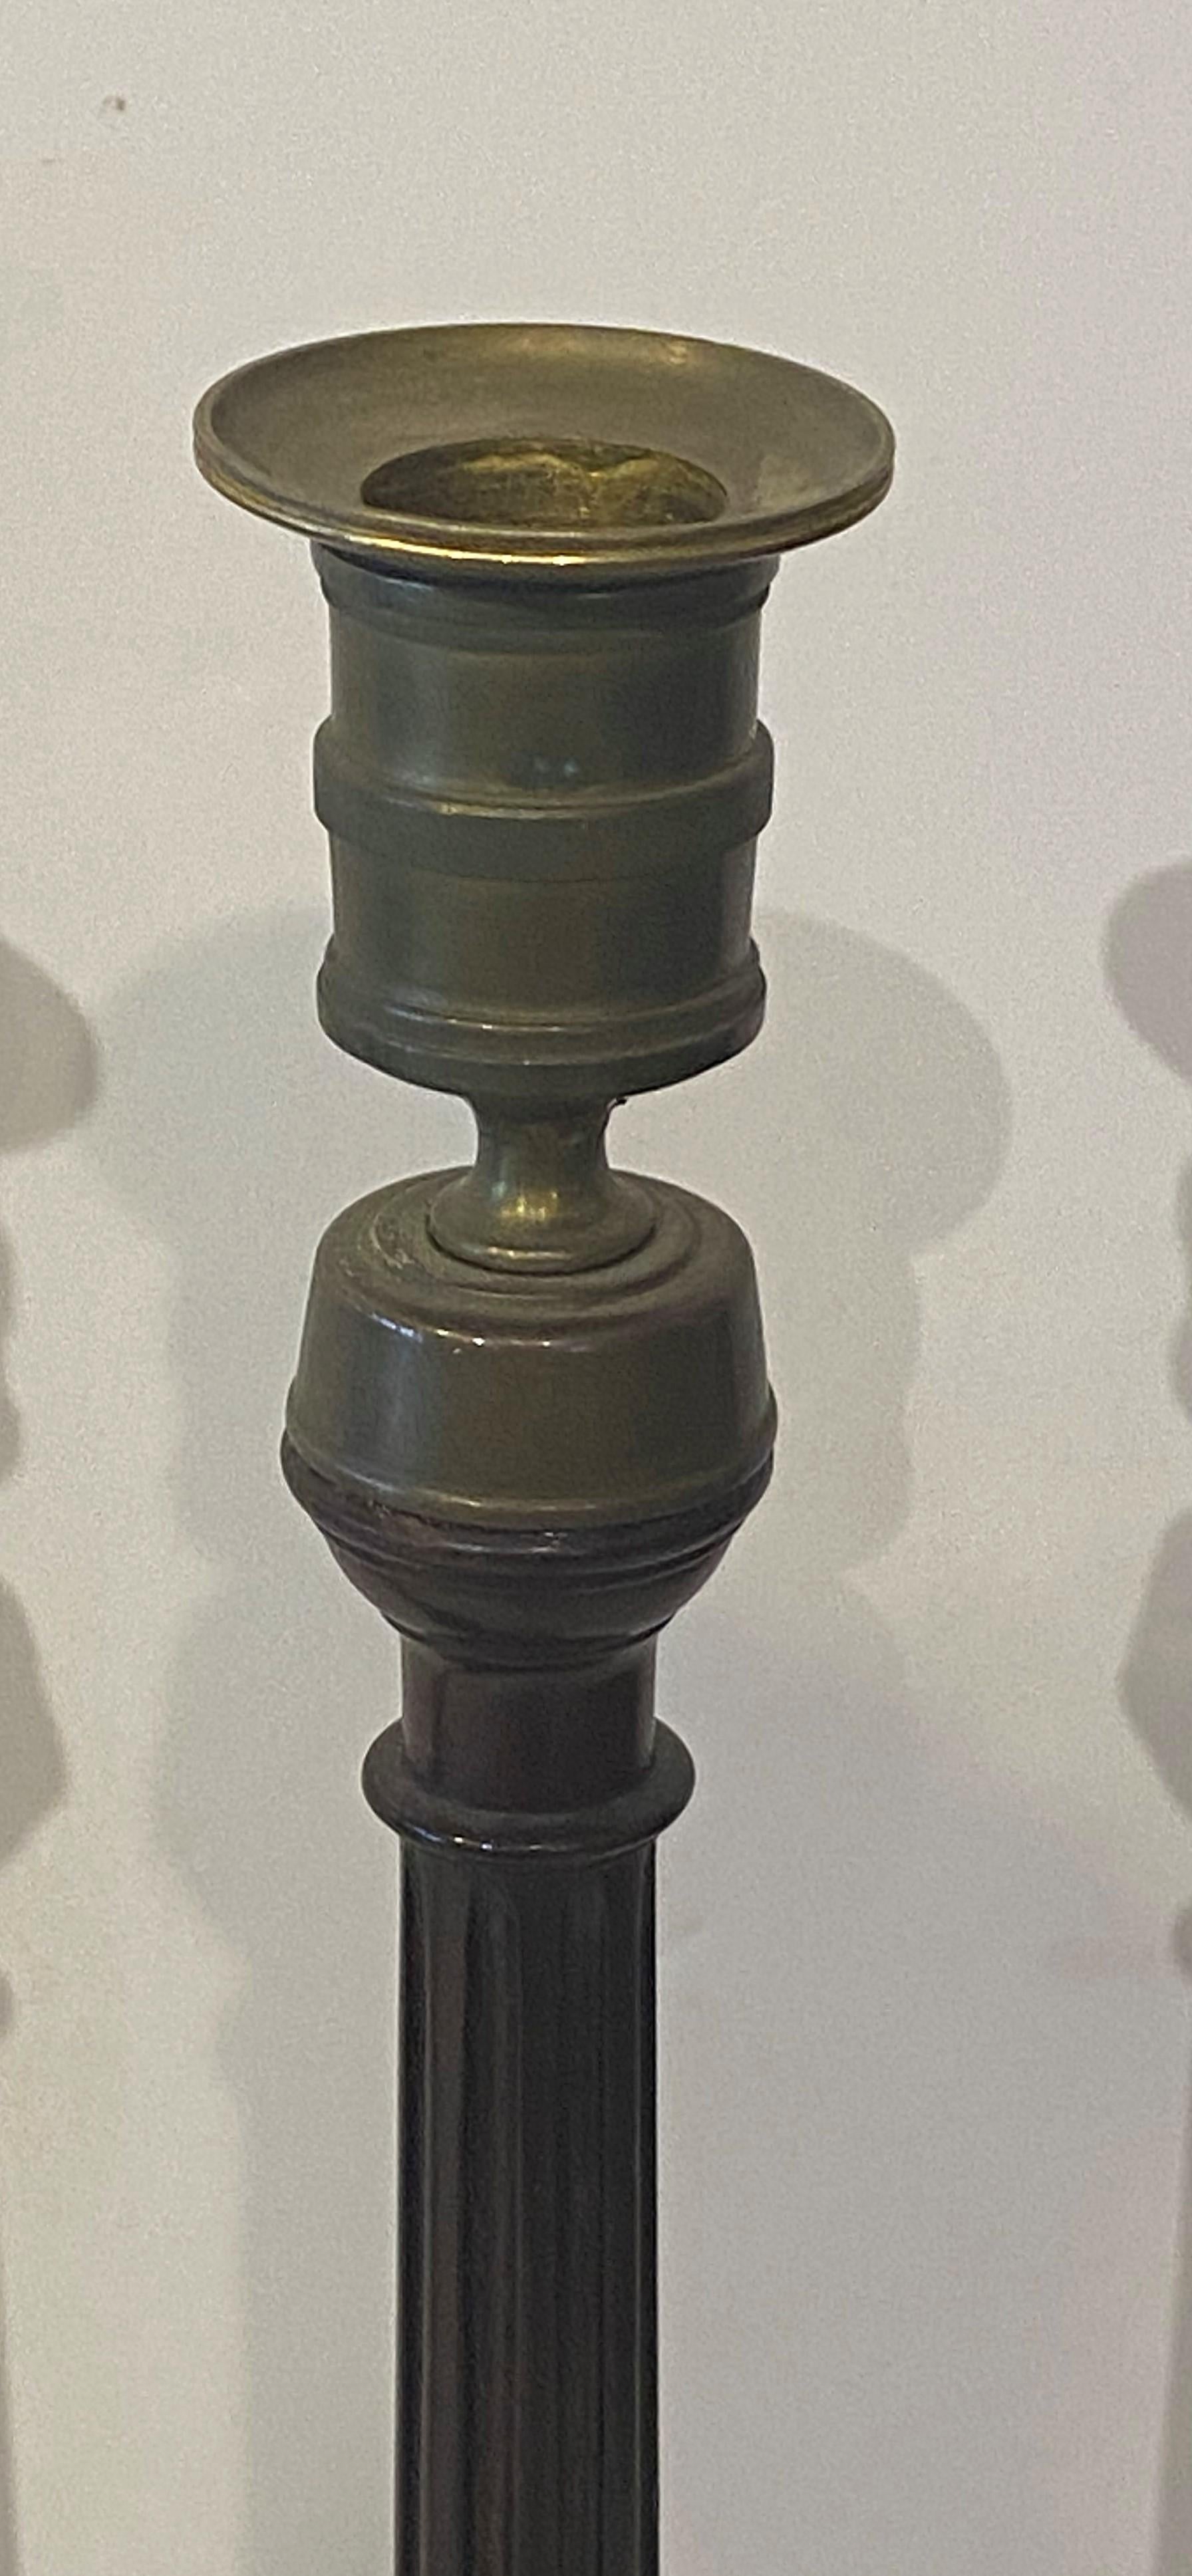 Fine pair of Georgian mahogany candlesticks with twisted columns and brass nozzles and drip pan--note these are not Victorian copies but period Candlesticks, late 18th C. 16.5